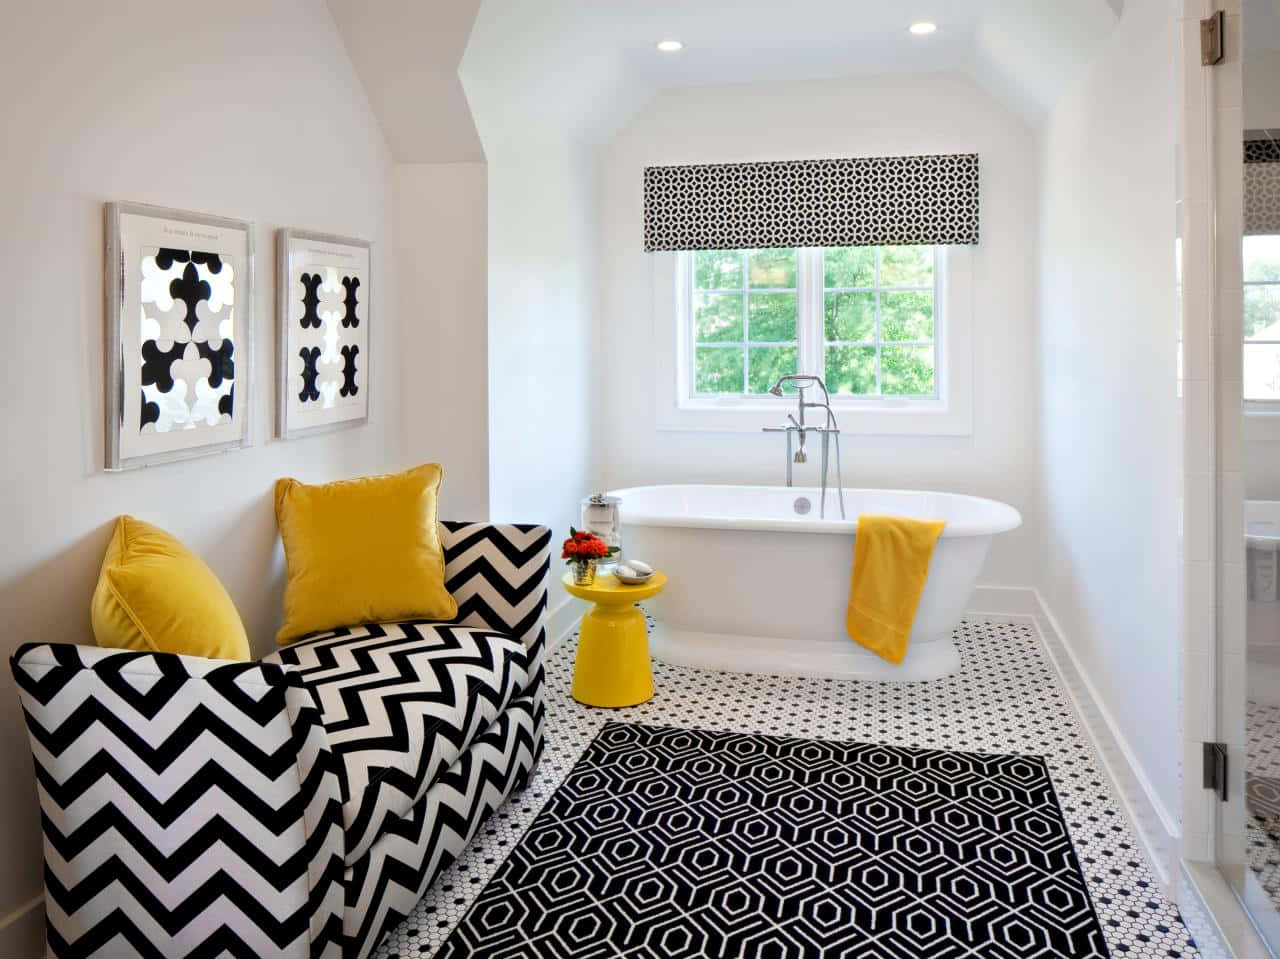 A Bathroom With A Yellow And Black Rug And Tub